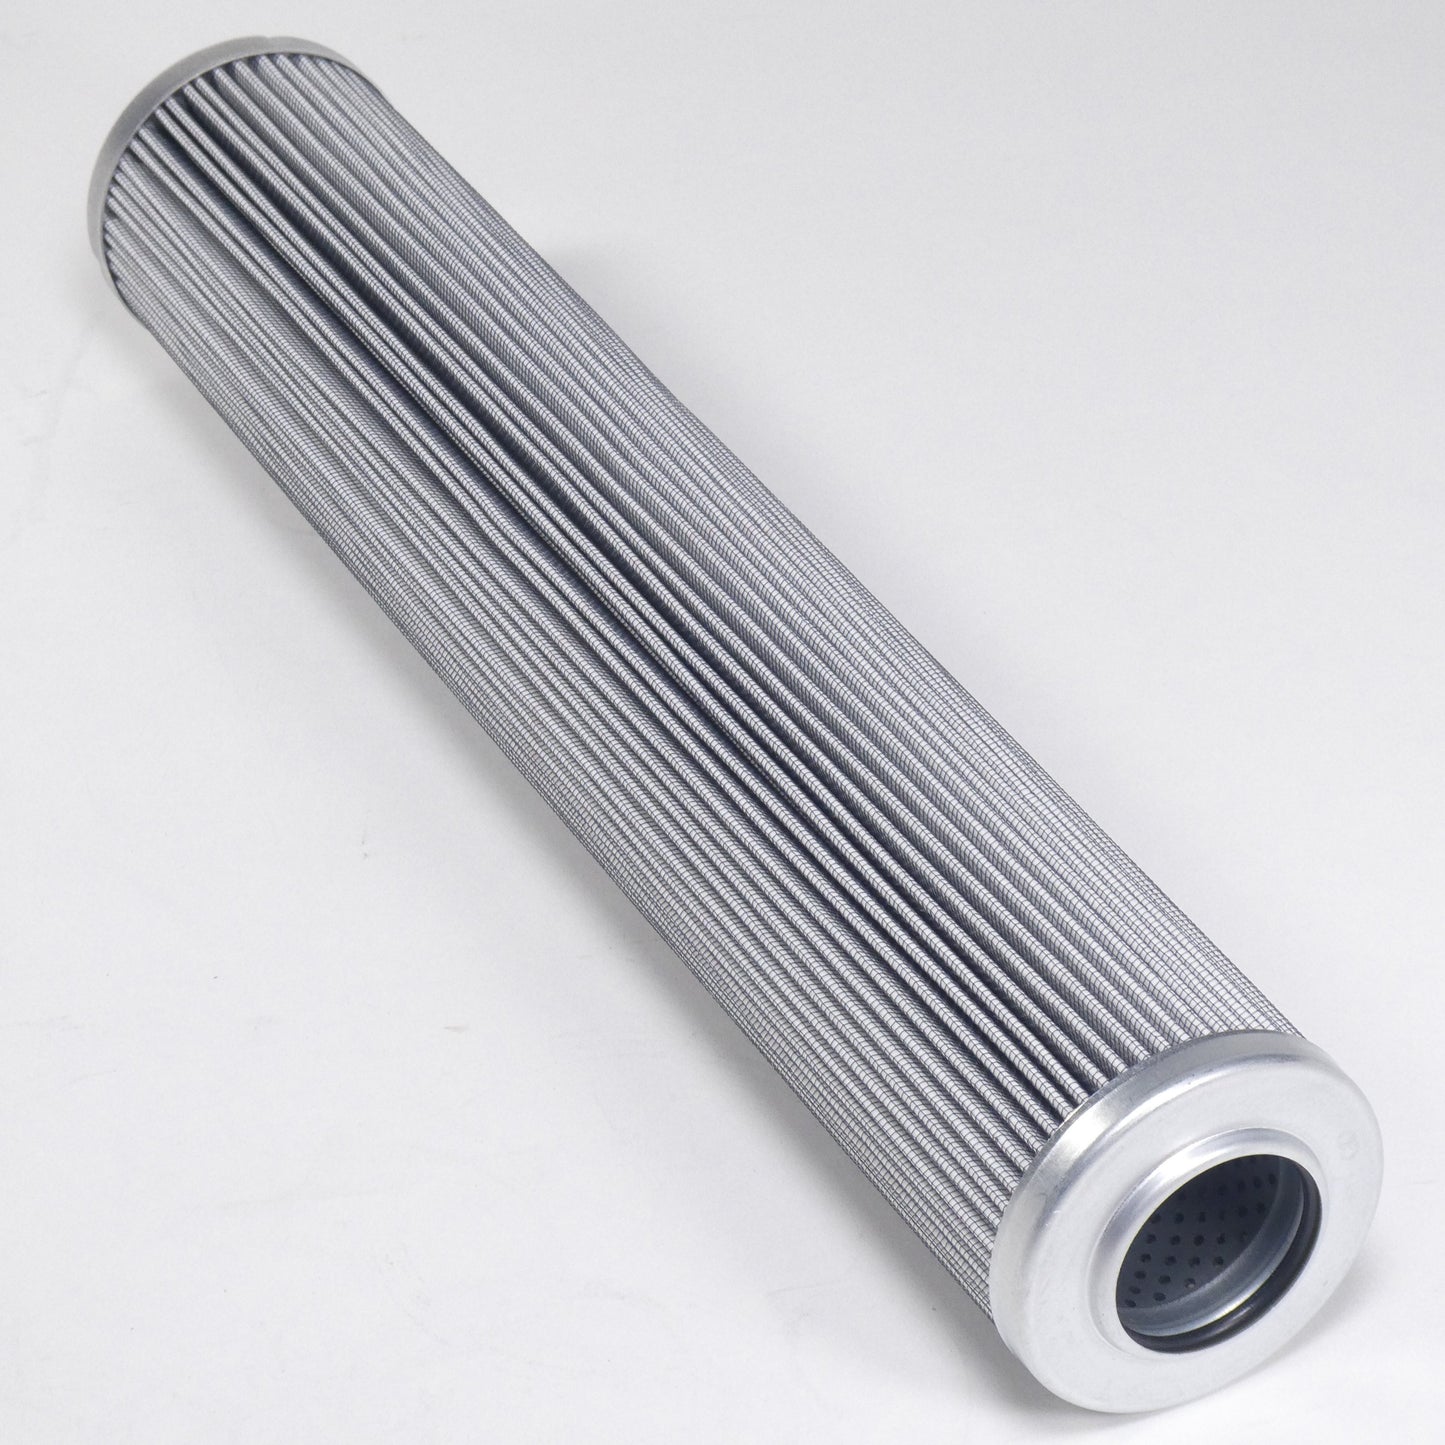 Hydrafil Replacement Filter Element for Filtersoft M69616MDB